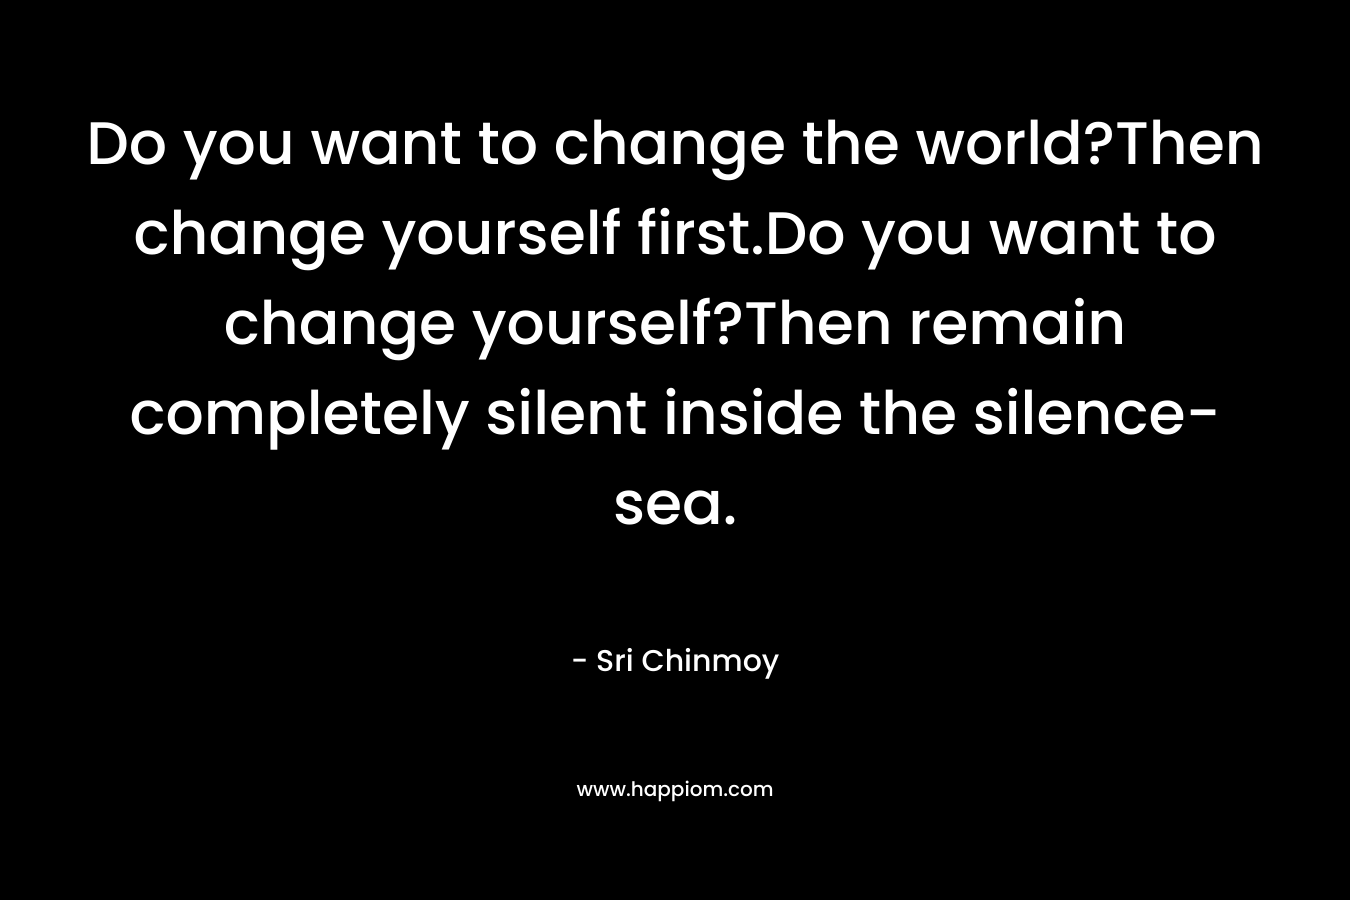 Do you want to change the world?Then change yourself first.Do you want to change yourself?Then remain completely silent inside the silence-sea. – Sri Chinmoy